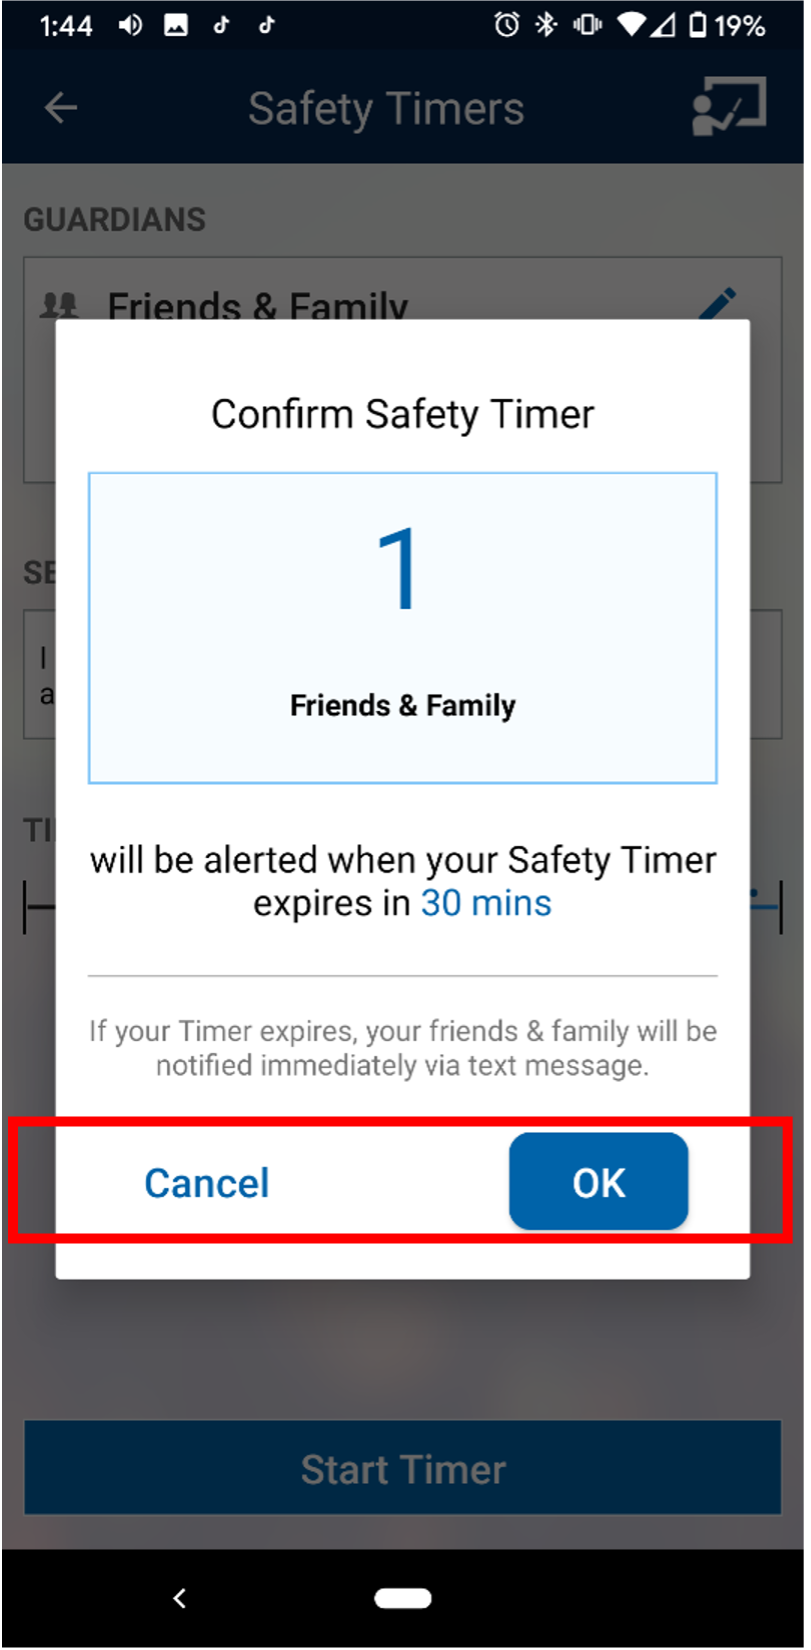 Guardian app confirm safety timer